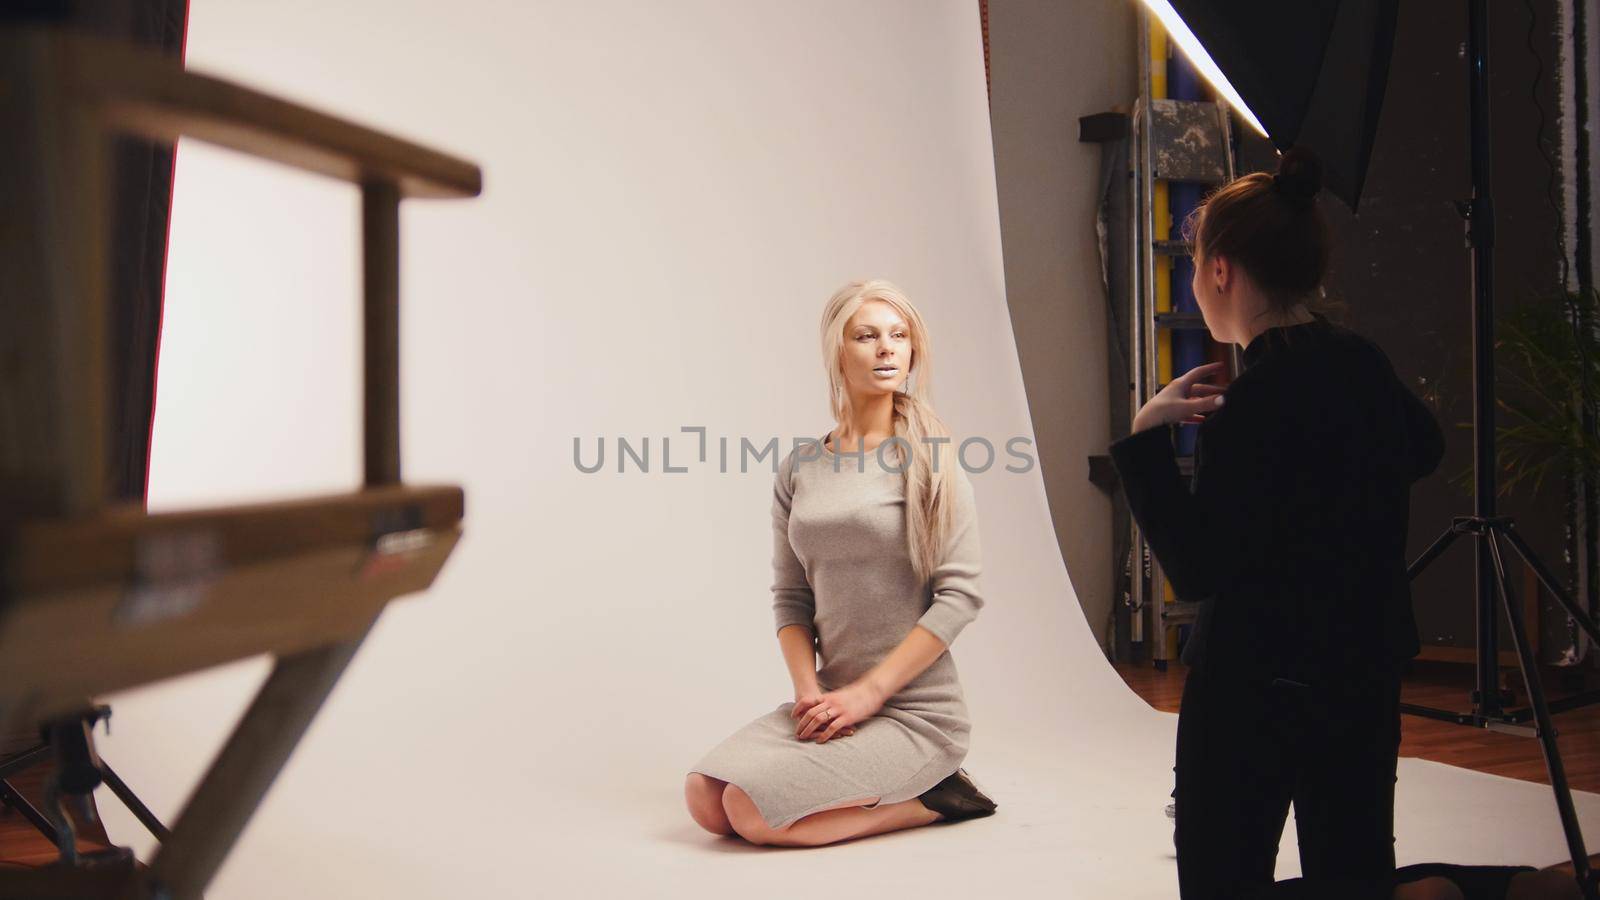 Fashion photo backstage - Blonde handsome girl posing for photographer - model sits at knees, white background